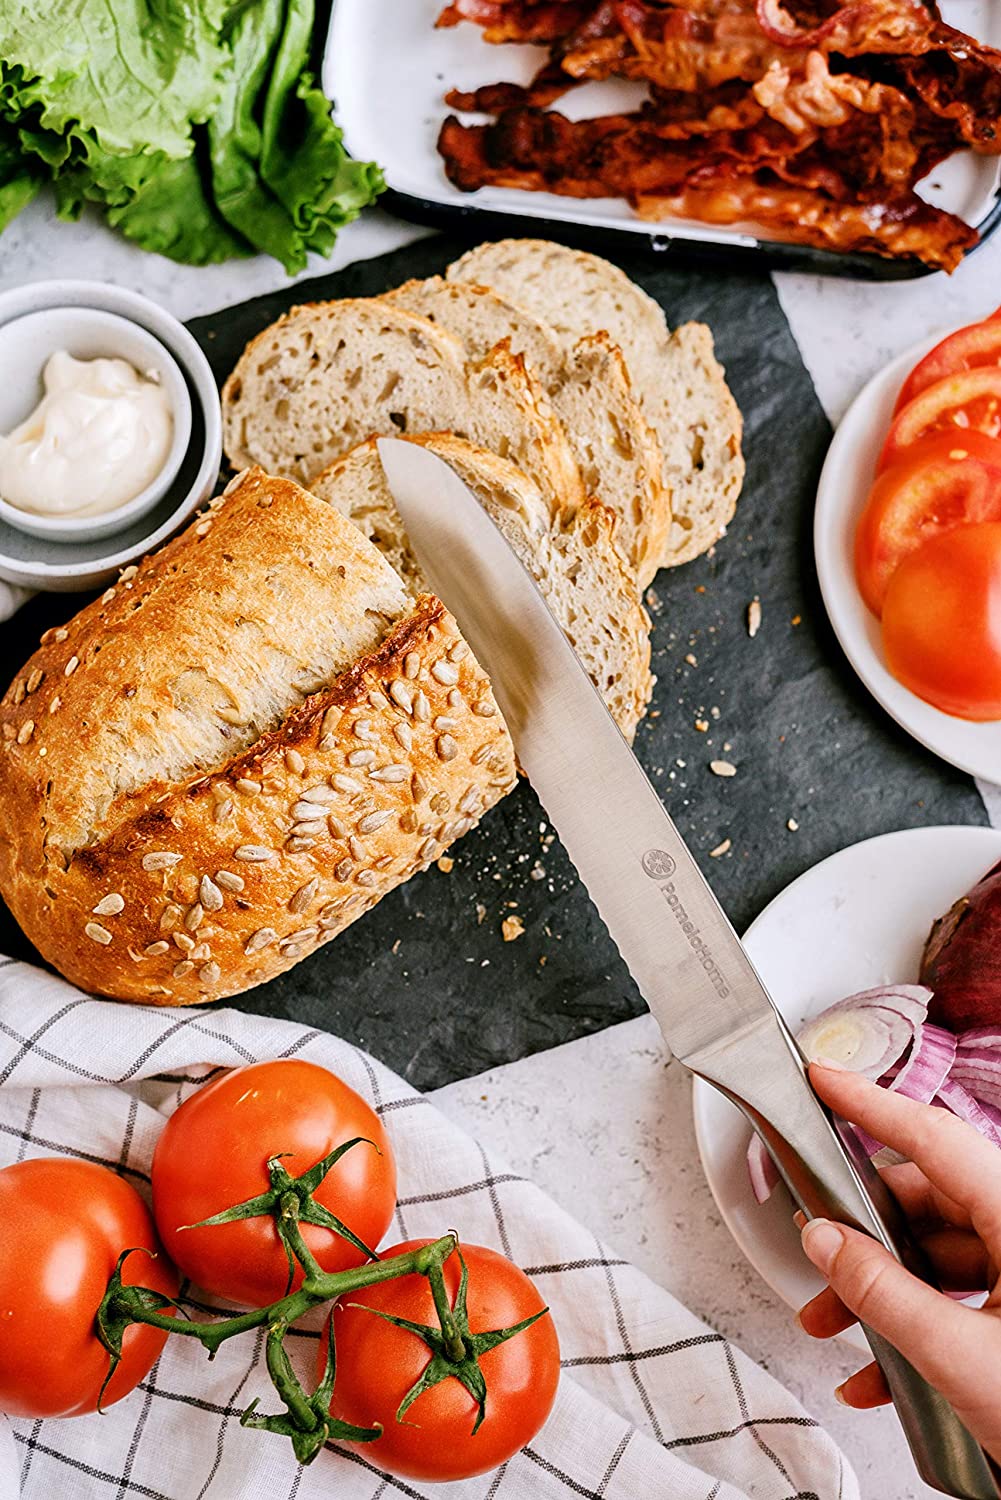 PomeloHome Bread Knife | 8 Serrated Stainless Steel Bread Knife | German High Carbon Steel Serrated Knife